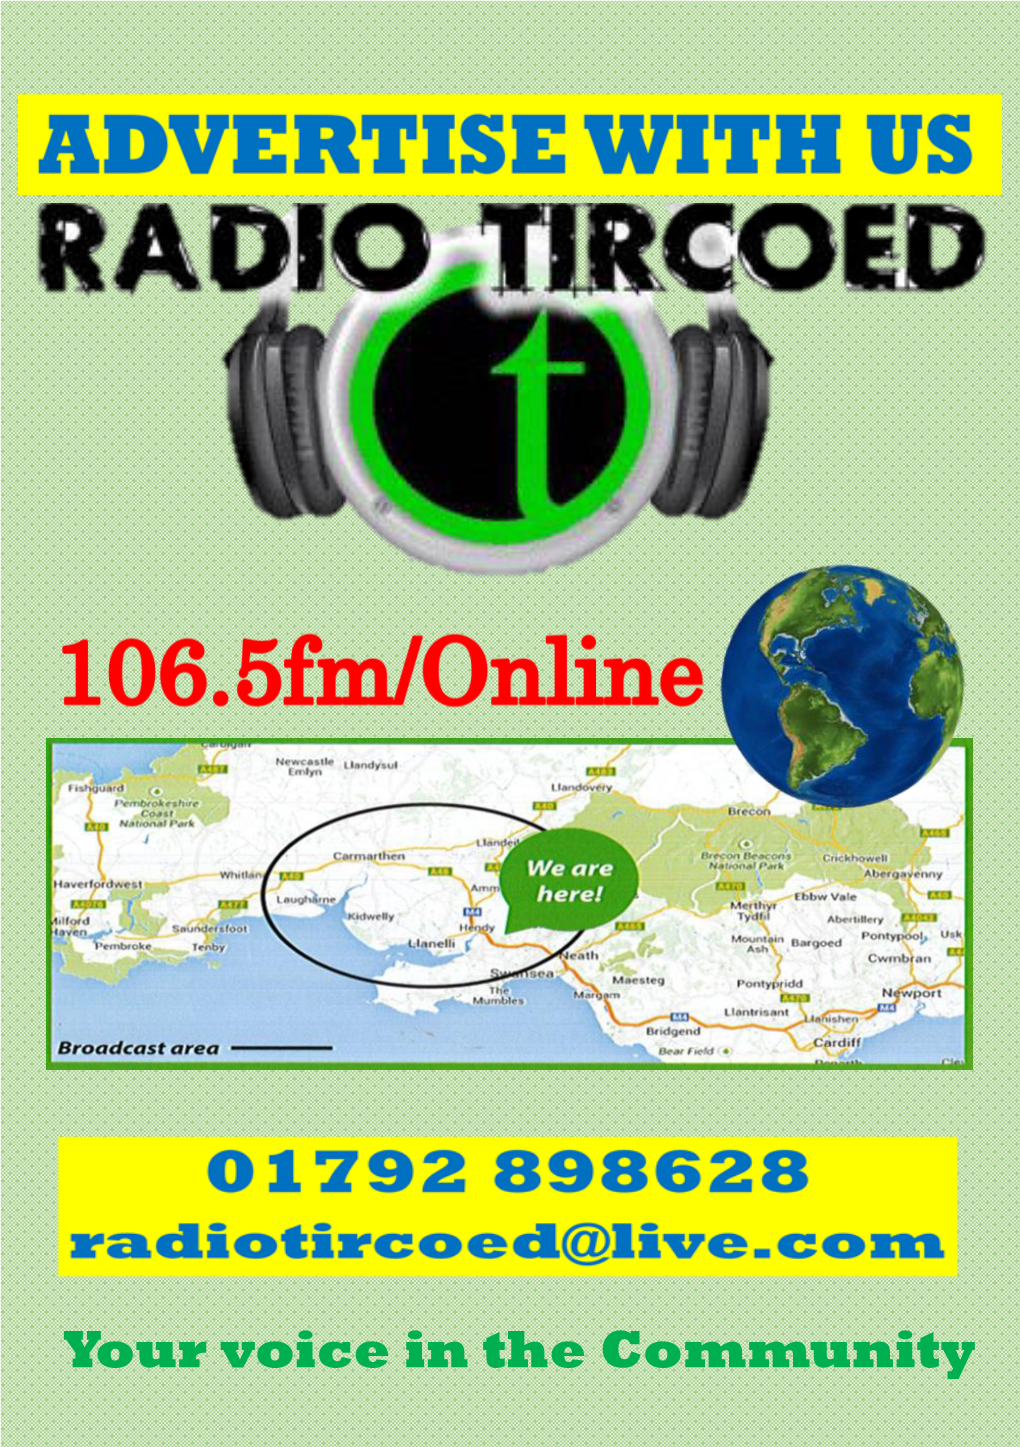 Radio Tircoed Is the Only Community Radio Station in the Area Broadcasting “Live” for 17 Hours a Day